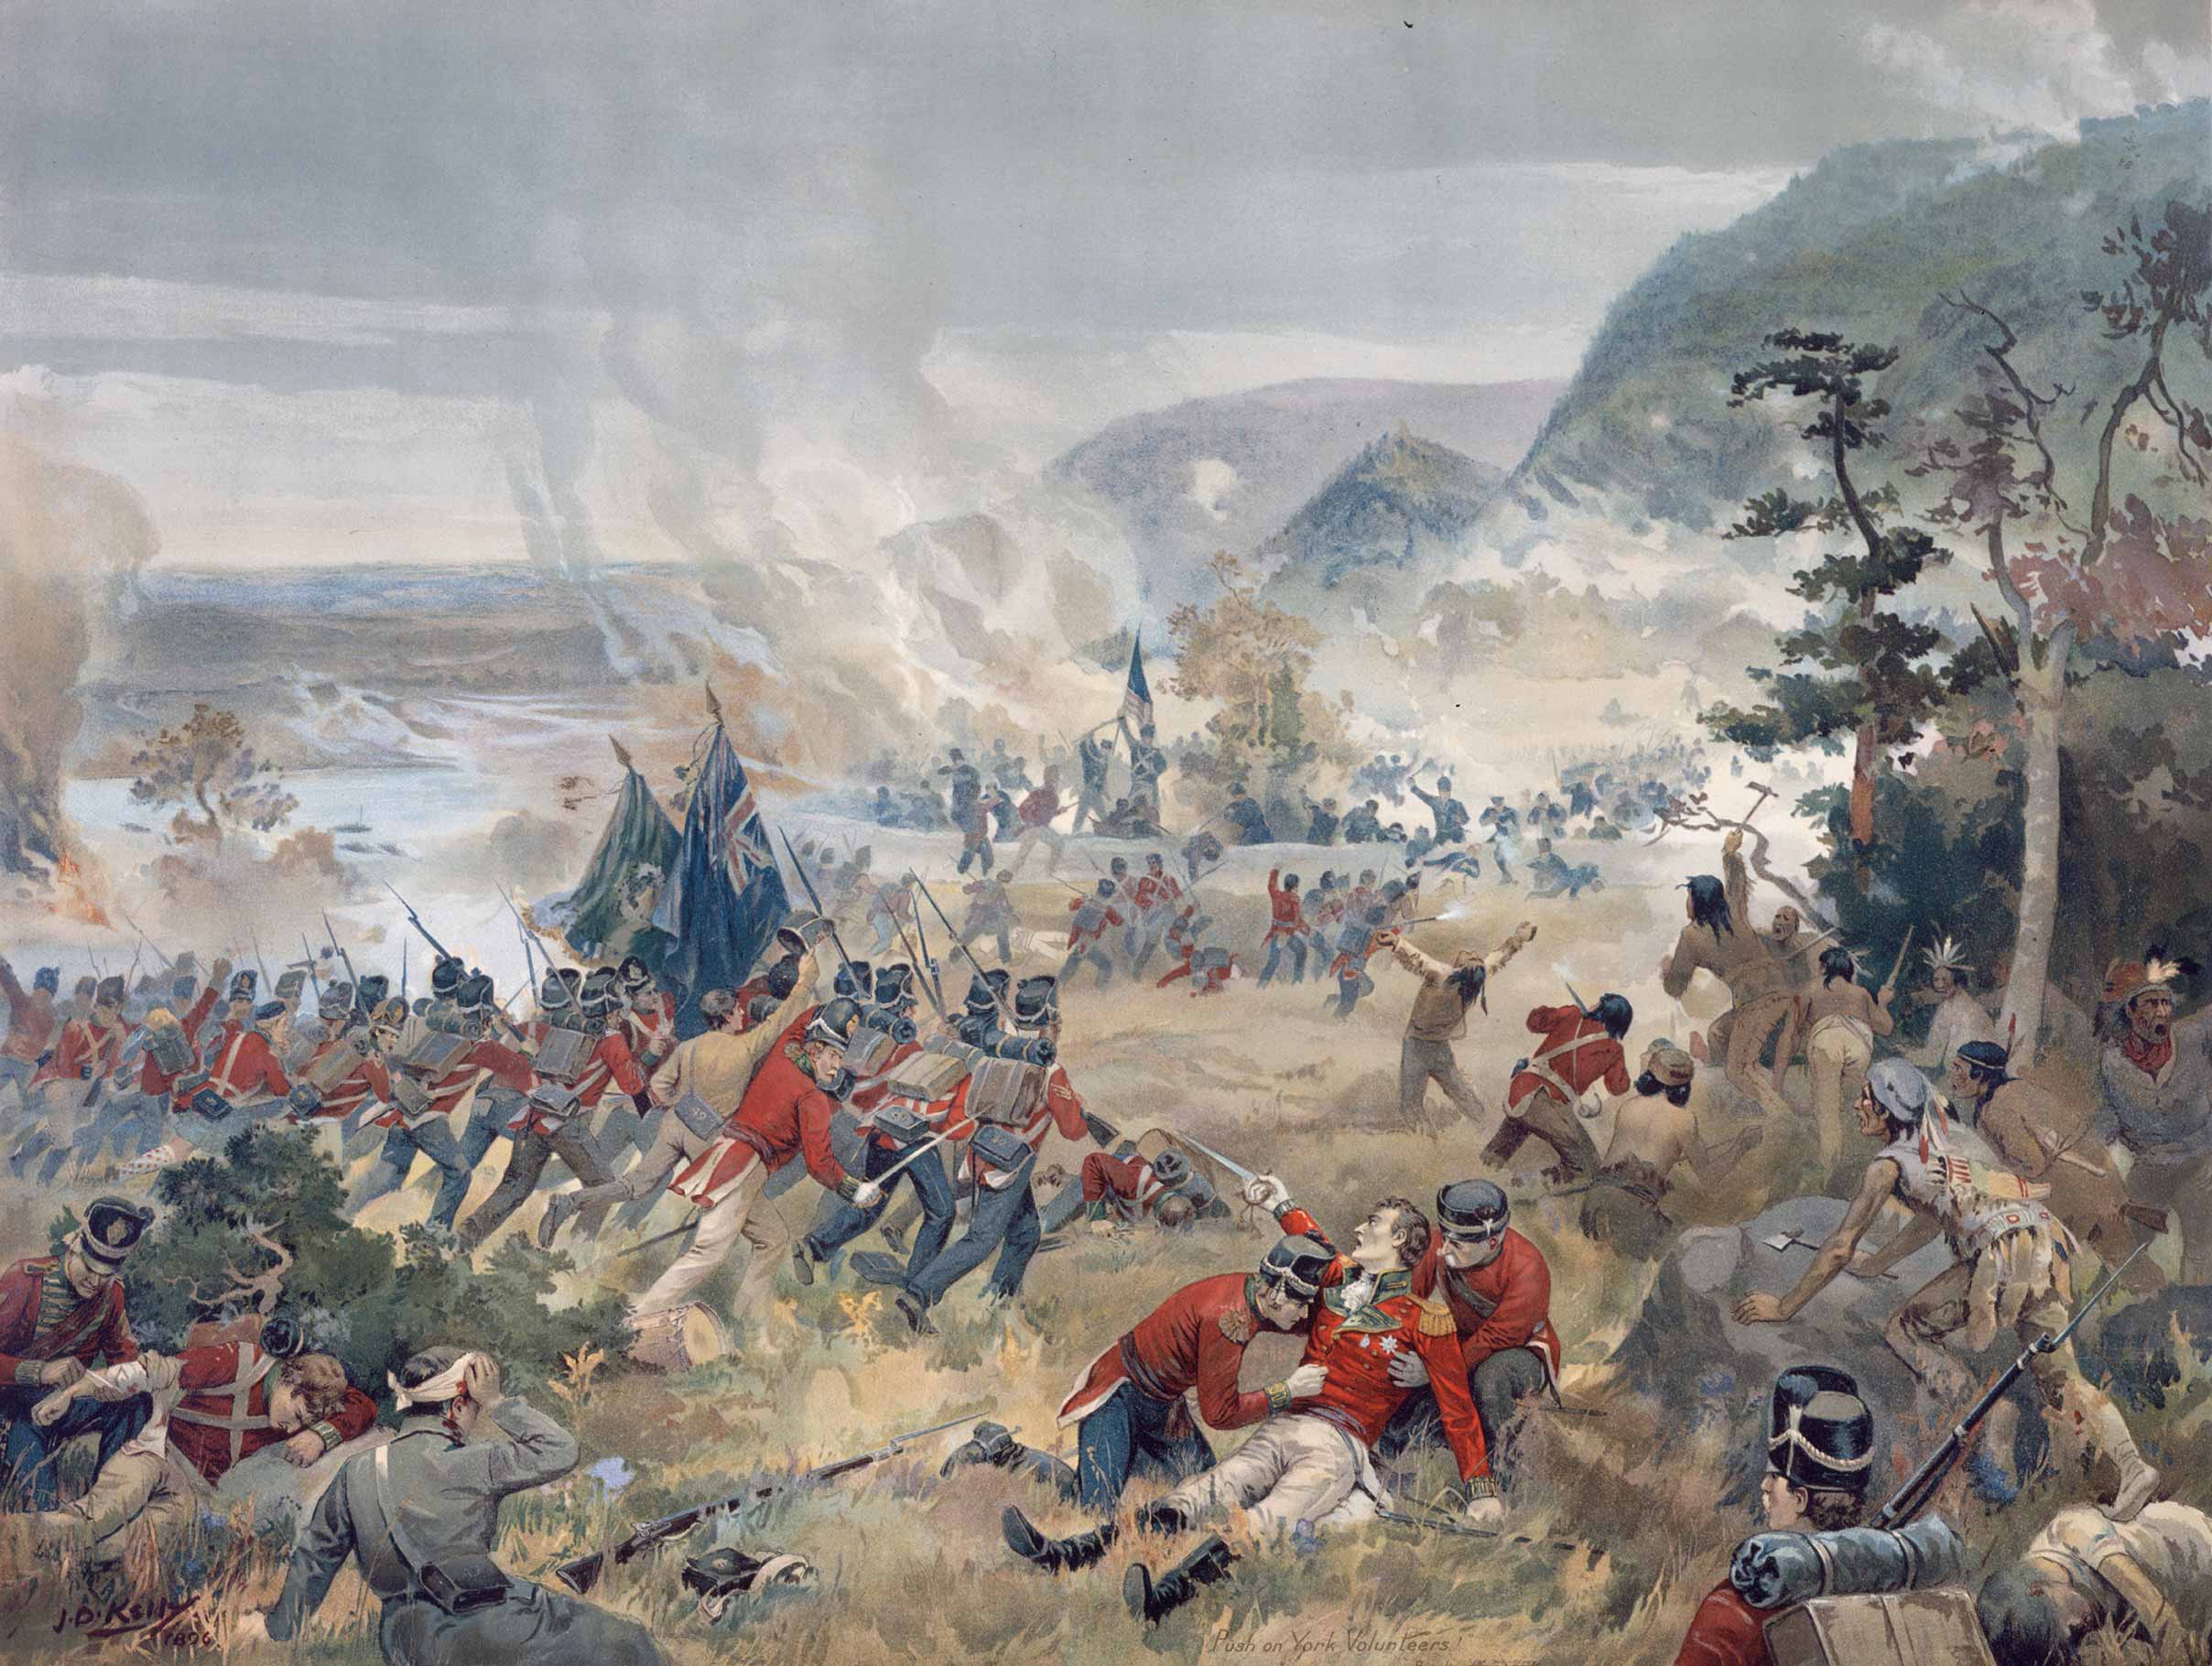 Painting of Indigenous warriors, American combatants, and British soldiers wearing red coats.